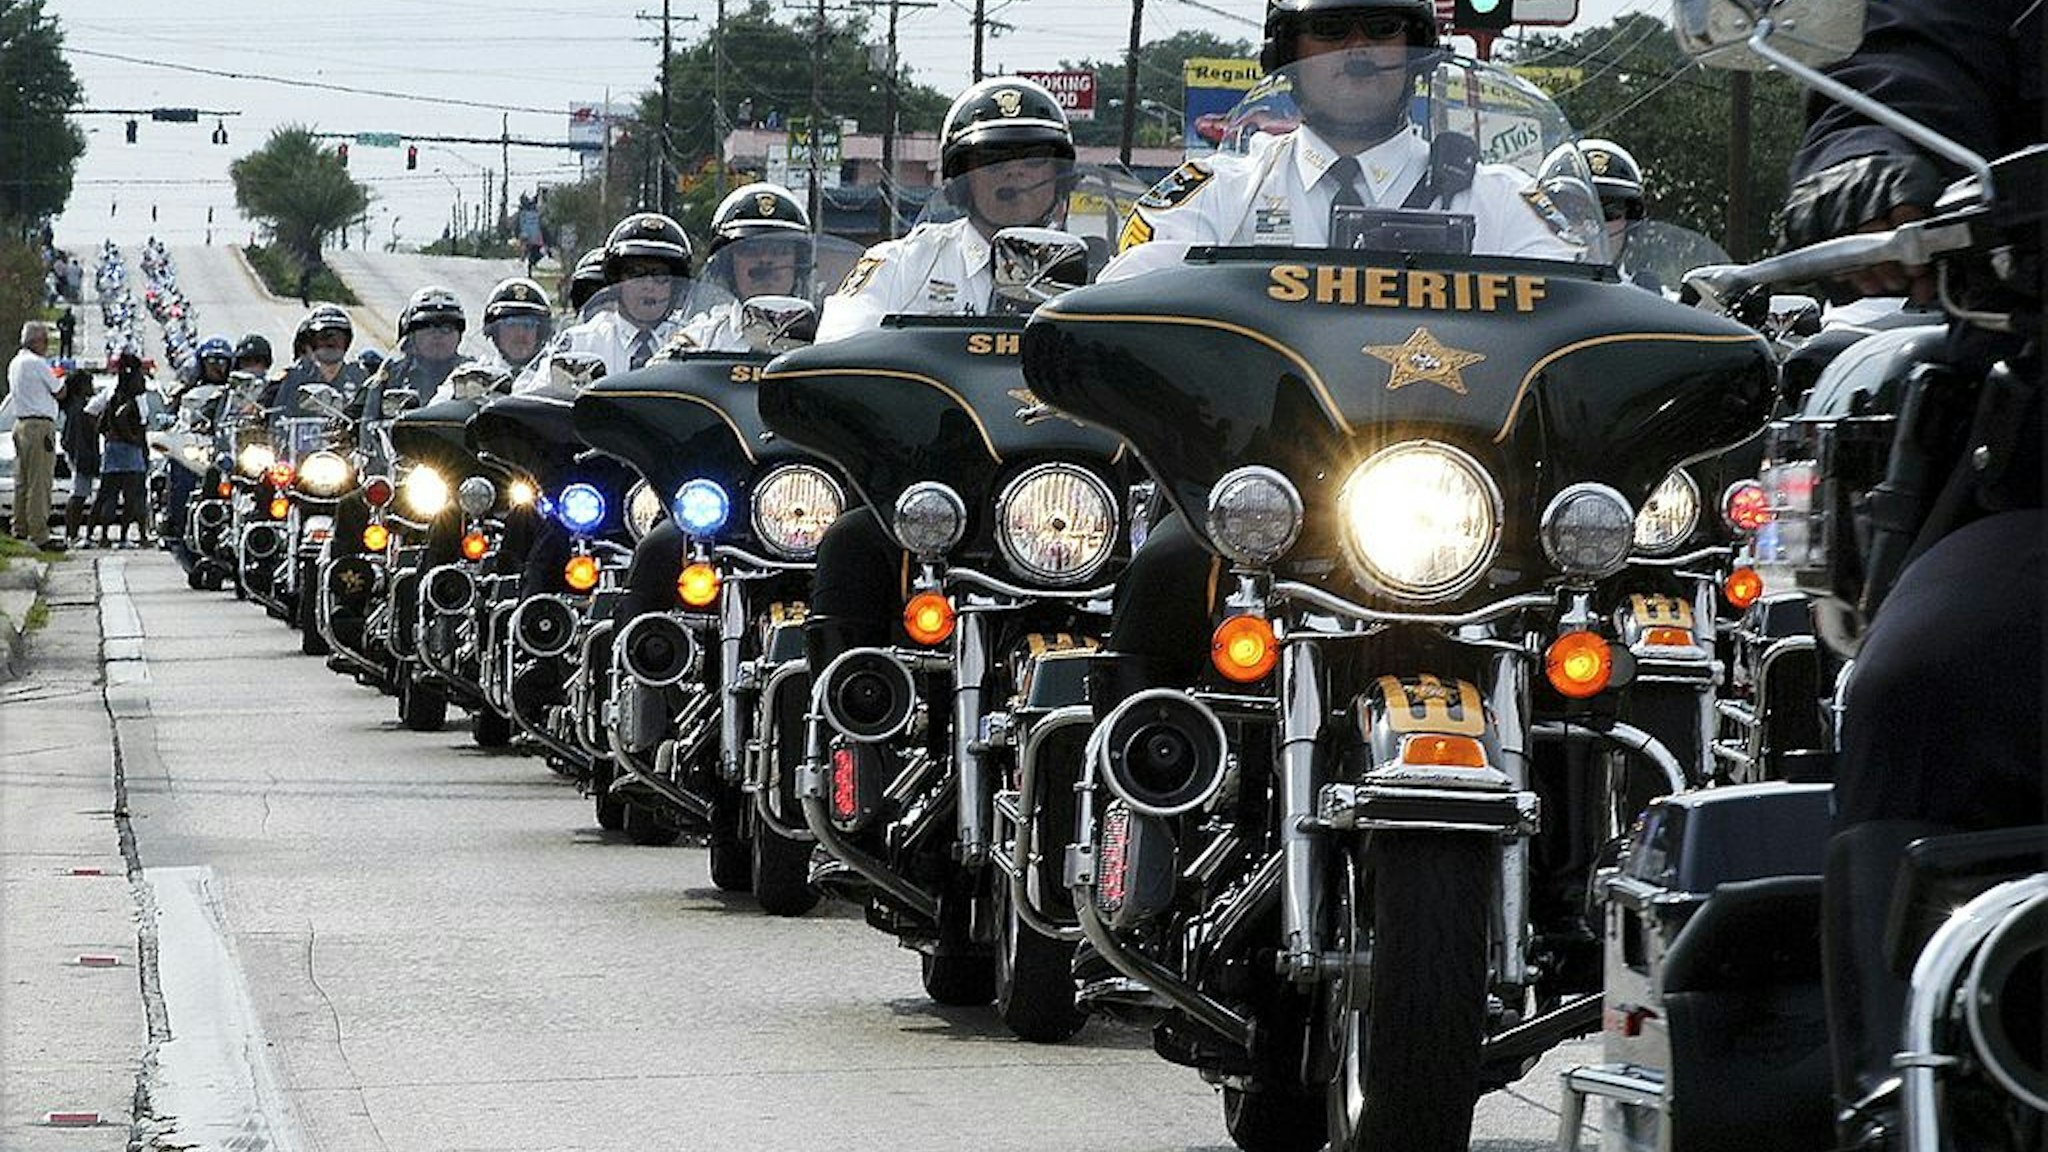 Motorcycle officers from around the country lead the procession for slain Polk County Sheriff's Deputy Matt Williams and his K9 Dioji October 3, 2006 in Lakeland, Florida.